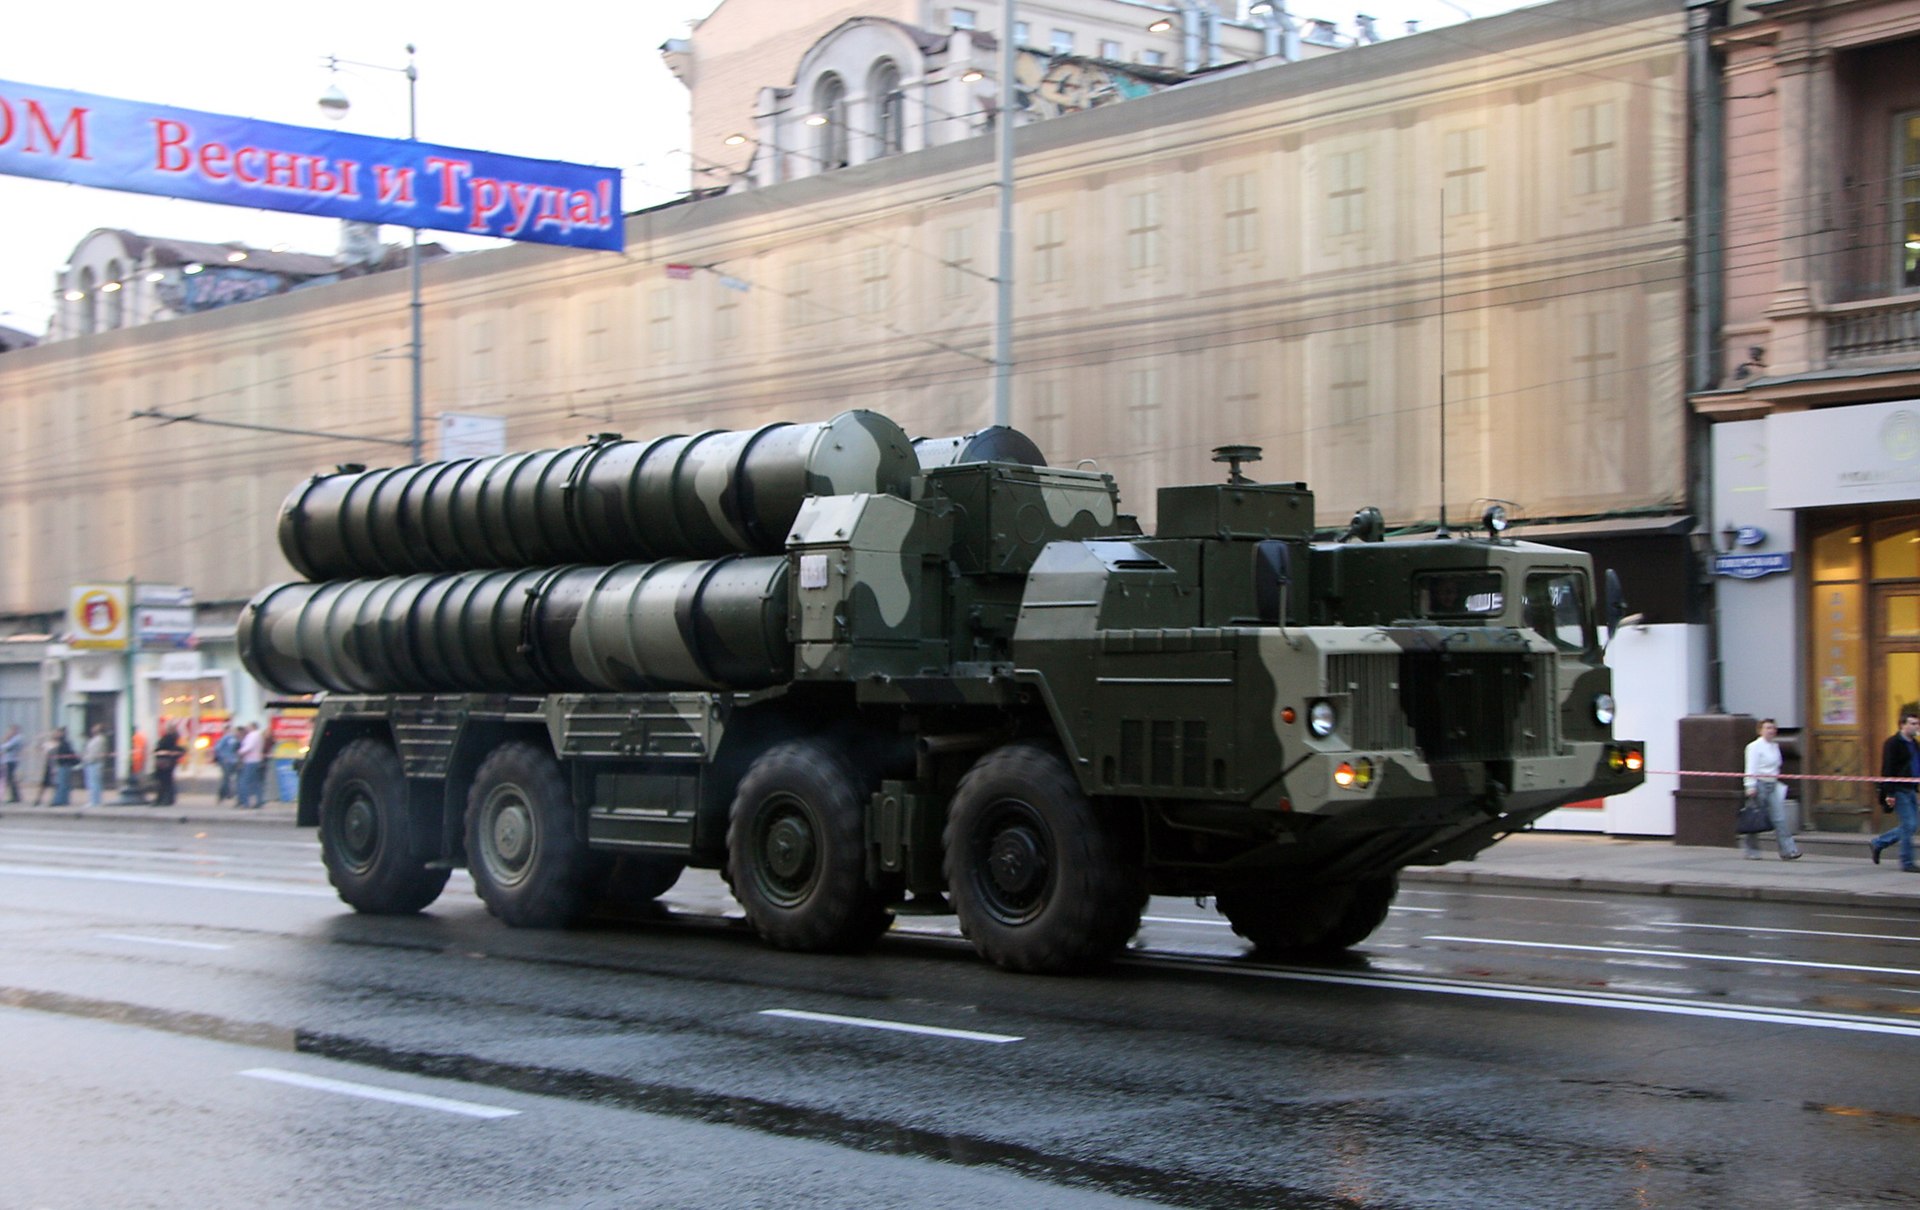 1920px-S-300_-_2009_Moscow_Victory_Day_Parade_%282%29.jpg